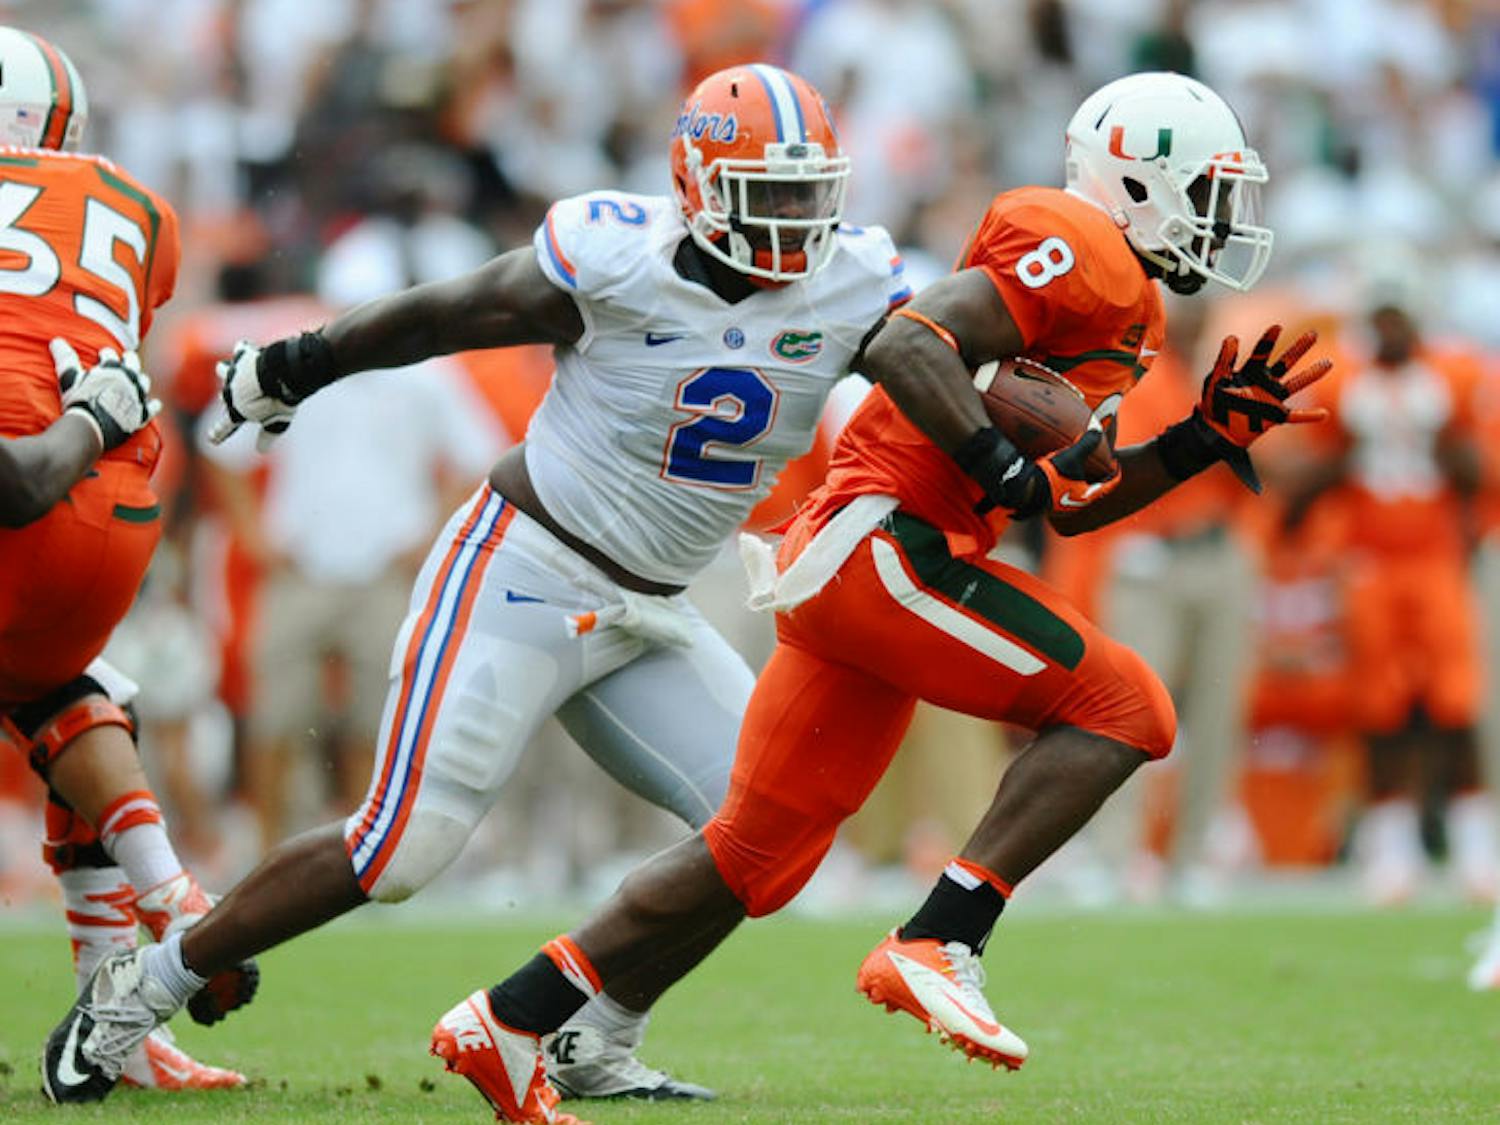 Florida senior defensive tackle Dominique Easley (2) chases Miami running back Duke Johnson (8) during the Gators’ 21-16 loss to the Hurricanes on Sept. 7 in Sun Life Stadium. UF is No. 3 in the nation in total defense, allowing 208.5 yards per game this season.